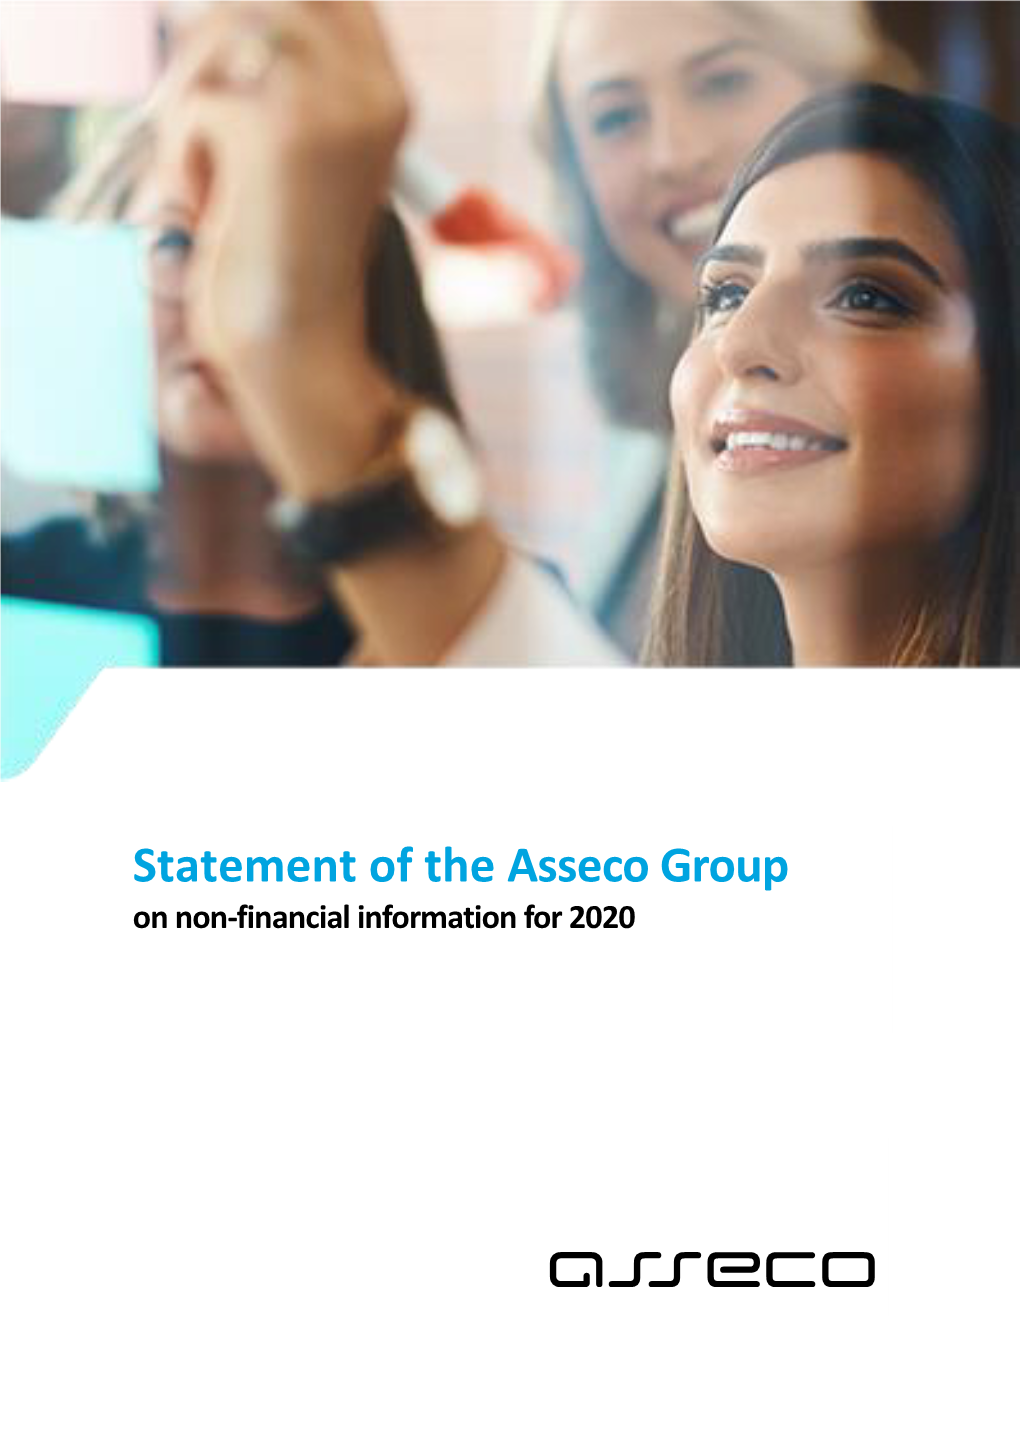 Statement of the Asseco Group on Non-Financial Information for 2020